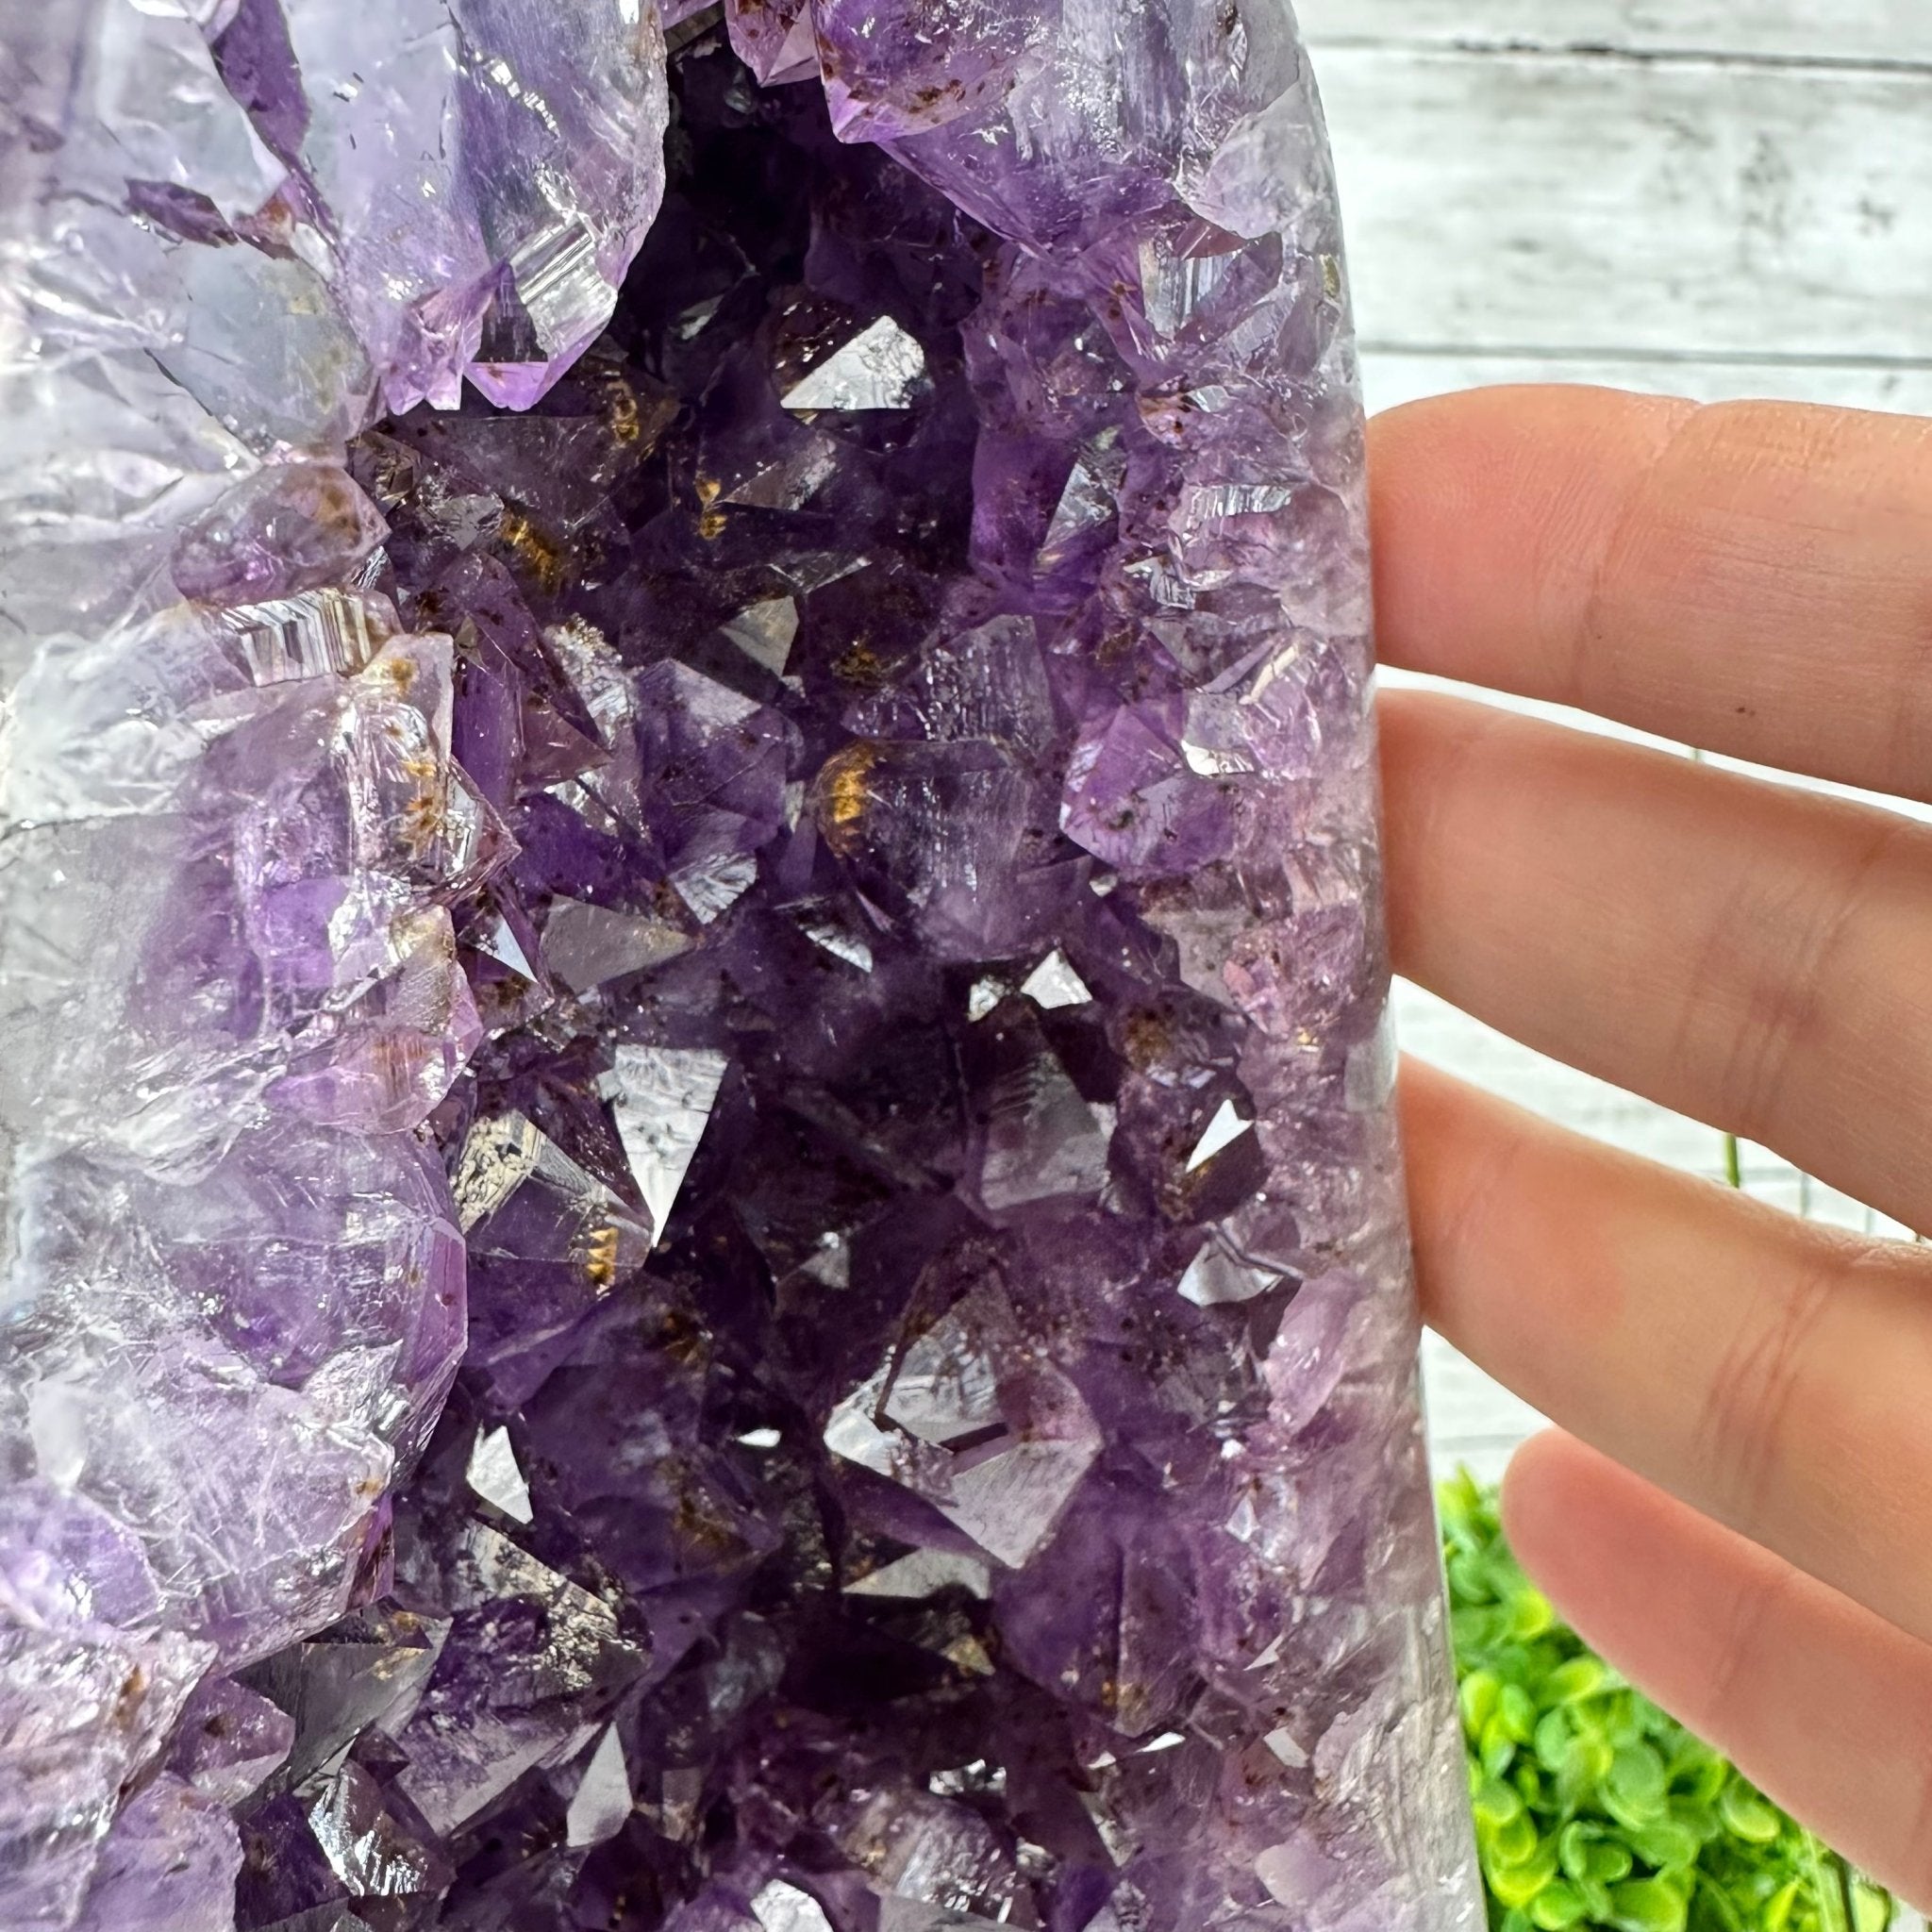 Extra Plus Quality Brazilian Amethyst Cathedral, 19.3 lbs & 13.25" Tall, Model #5601-1076 by Brazil Gems - Brazil GemsBrazil GemsExtra Plus Quality Brazilian Amethyst Cathedral, 19.3 lbs & 13.25" Tall, Model #5601-1076 by Brazil GemsCathedrals5601-1076